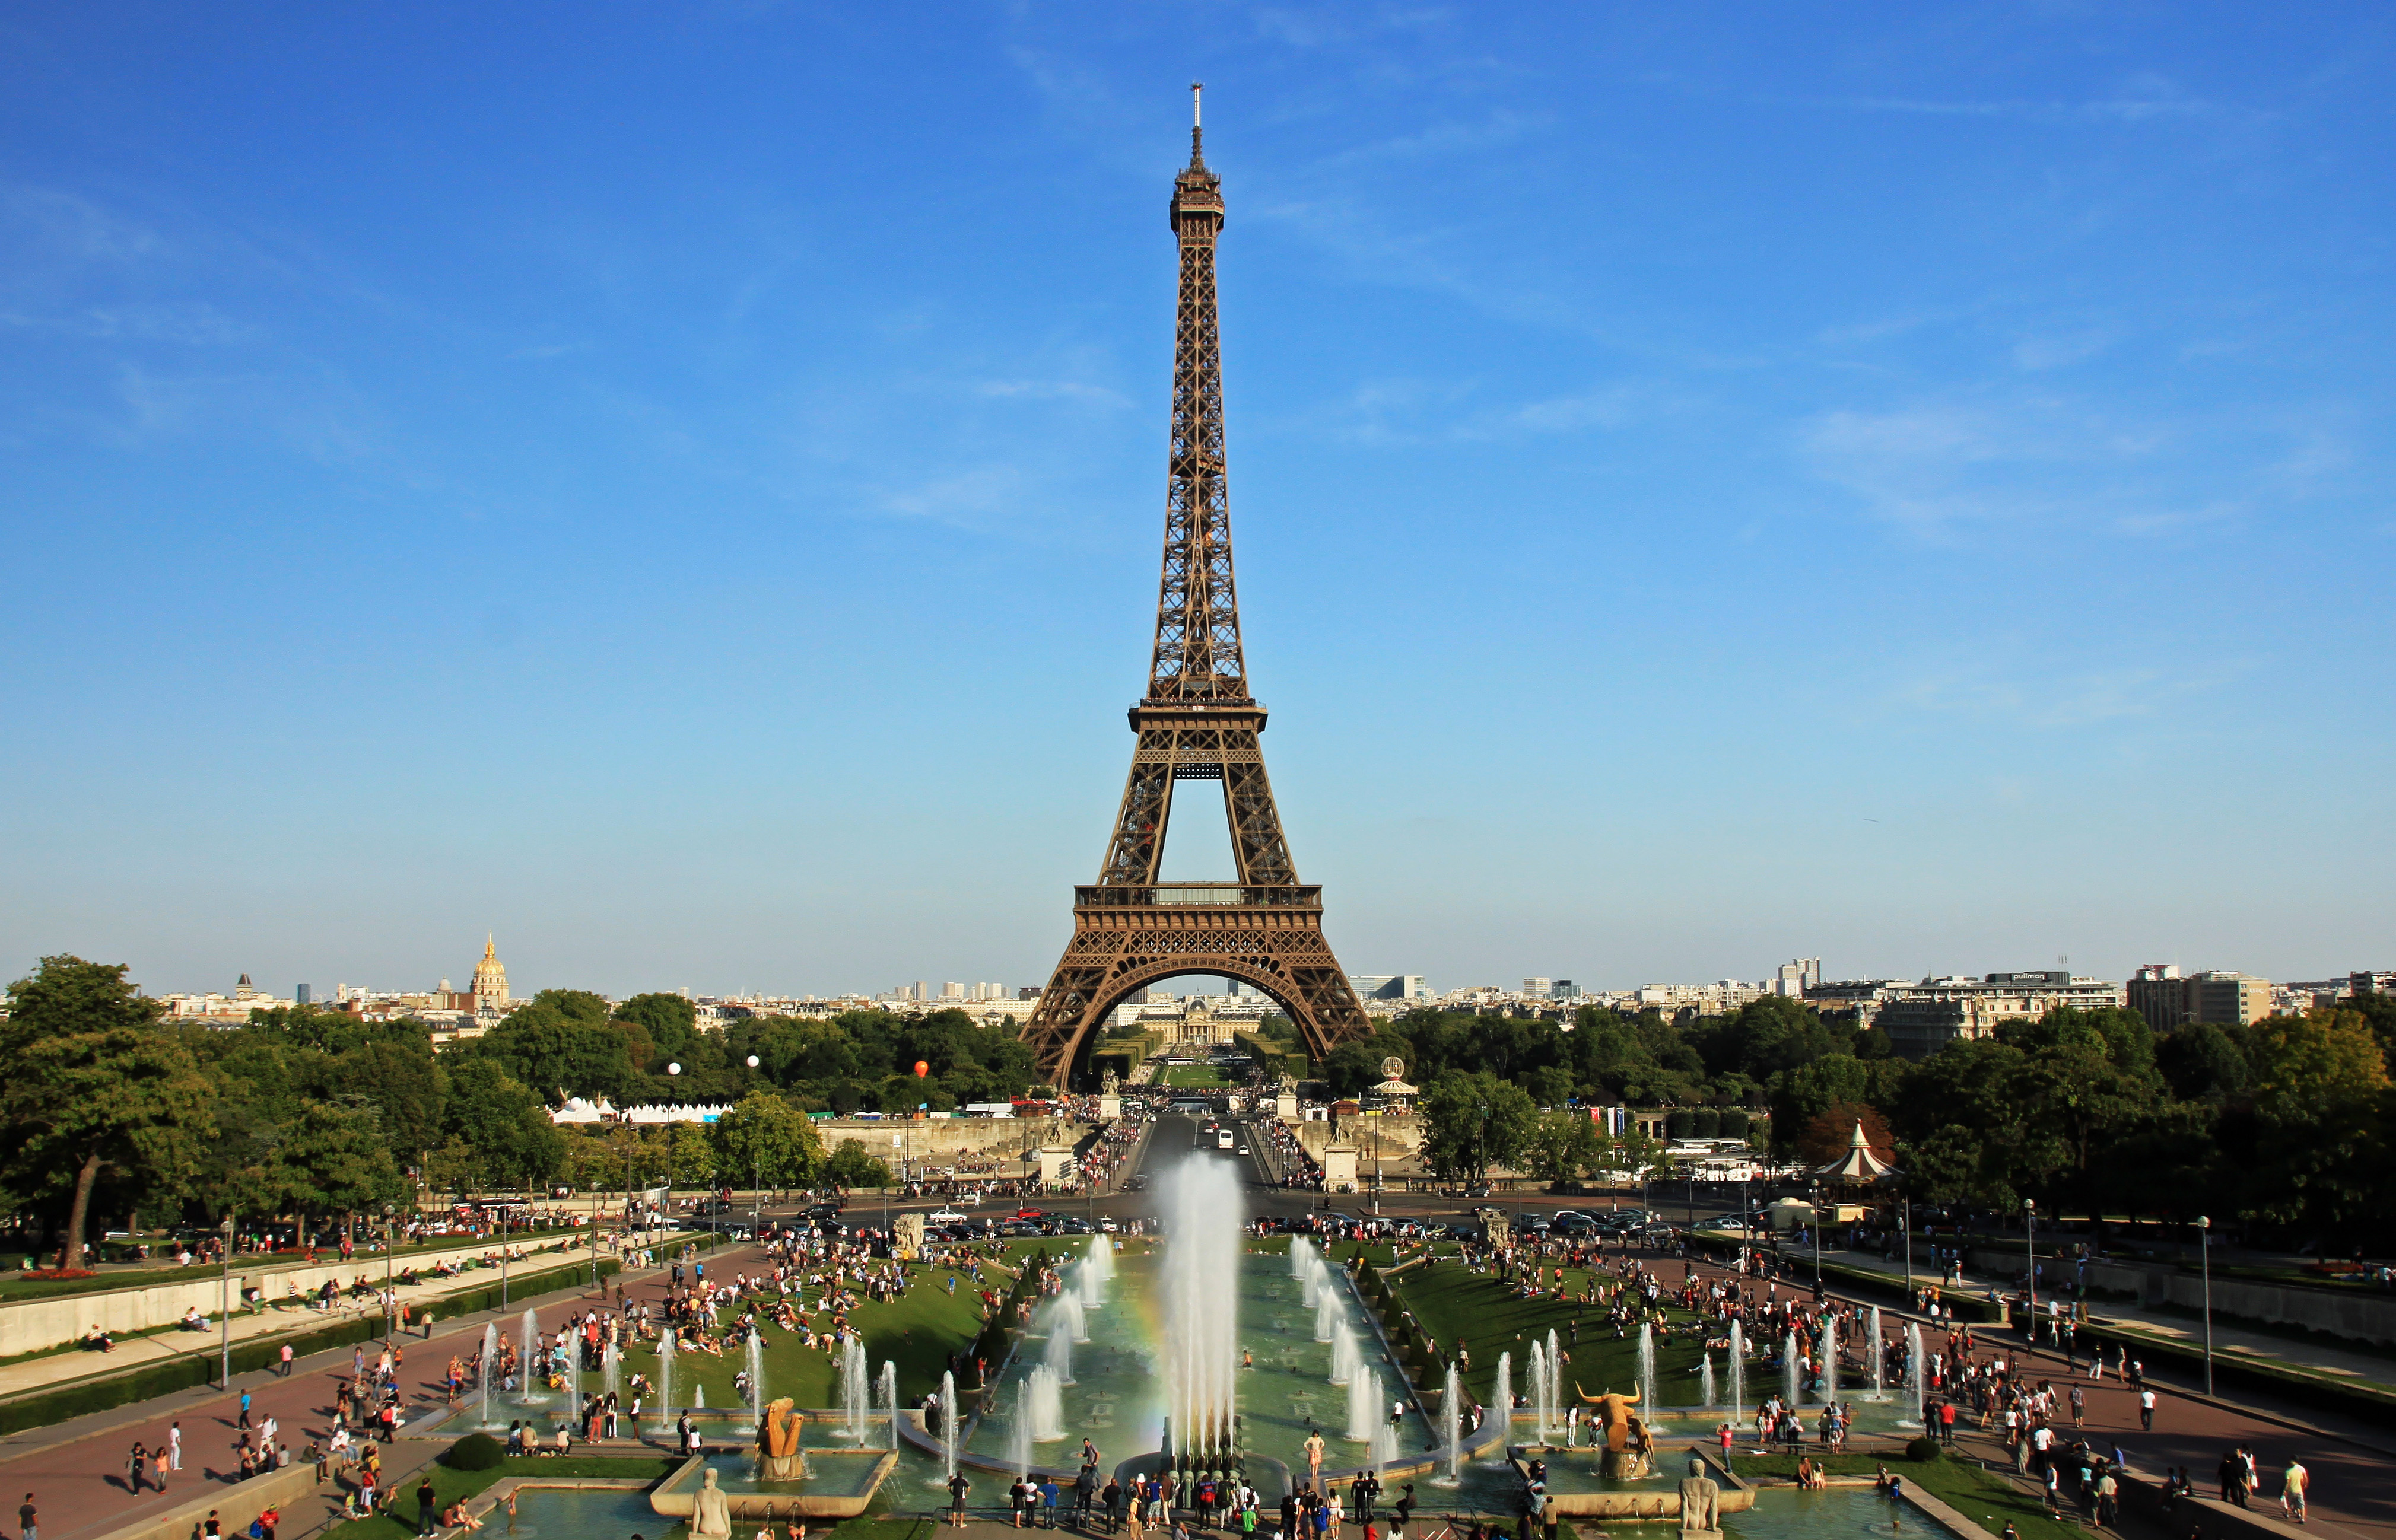 Eiffel Tower at #Paris, #France as featured on homelifeabroad.com #tourism #travel #eiffeltower